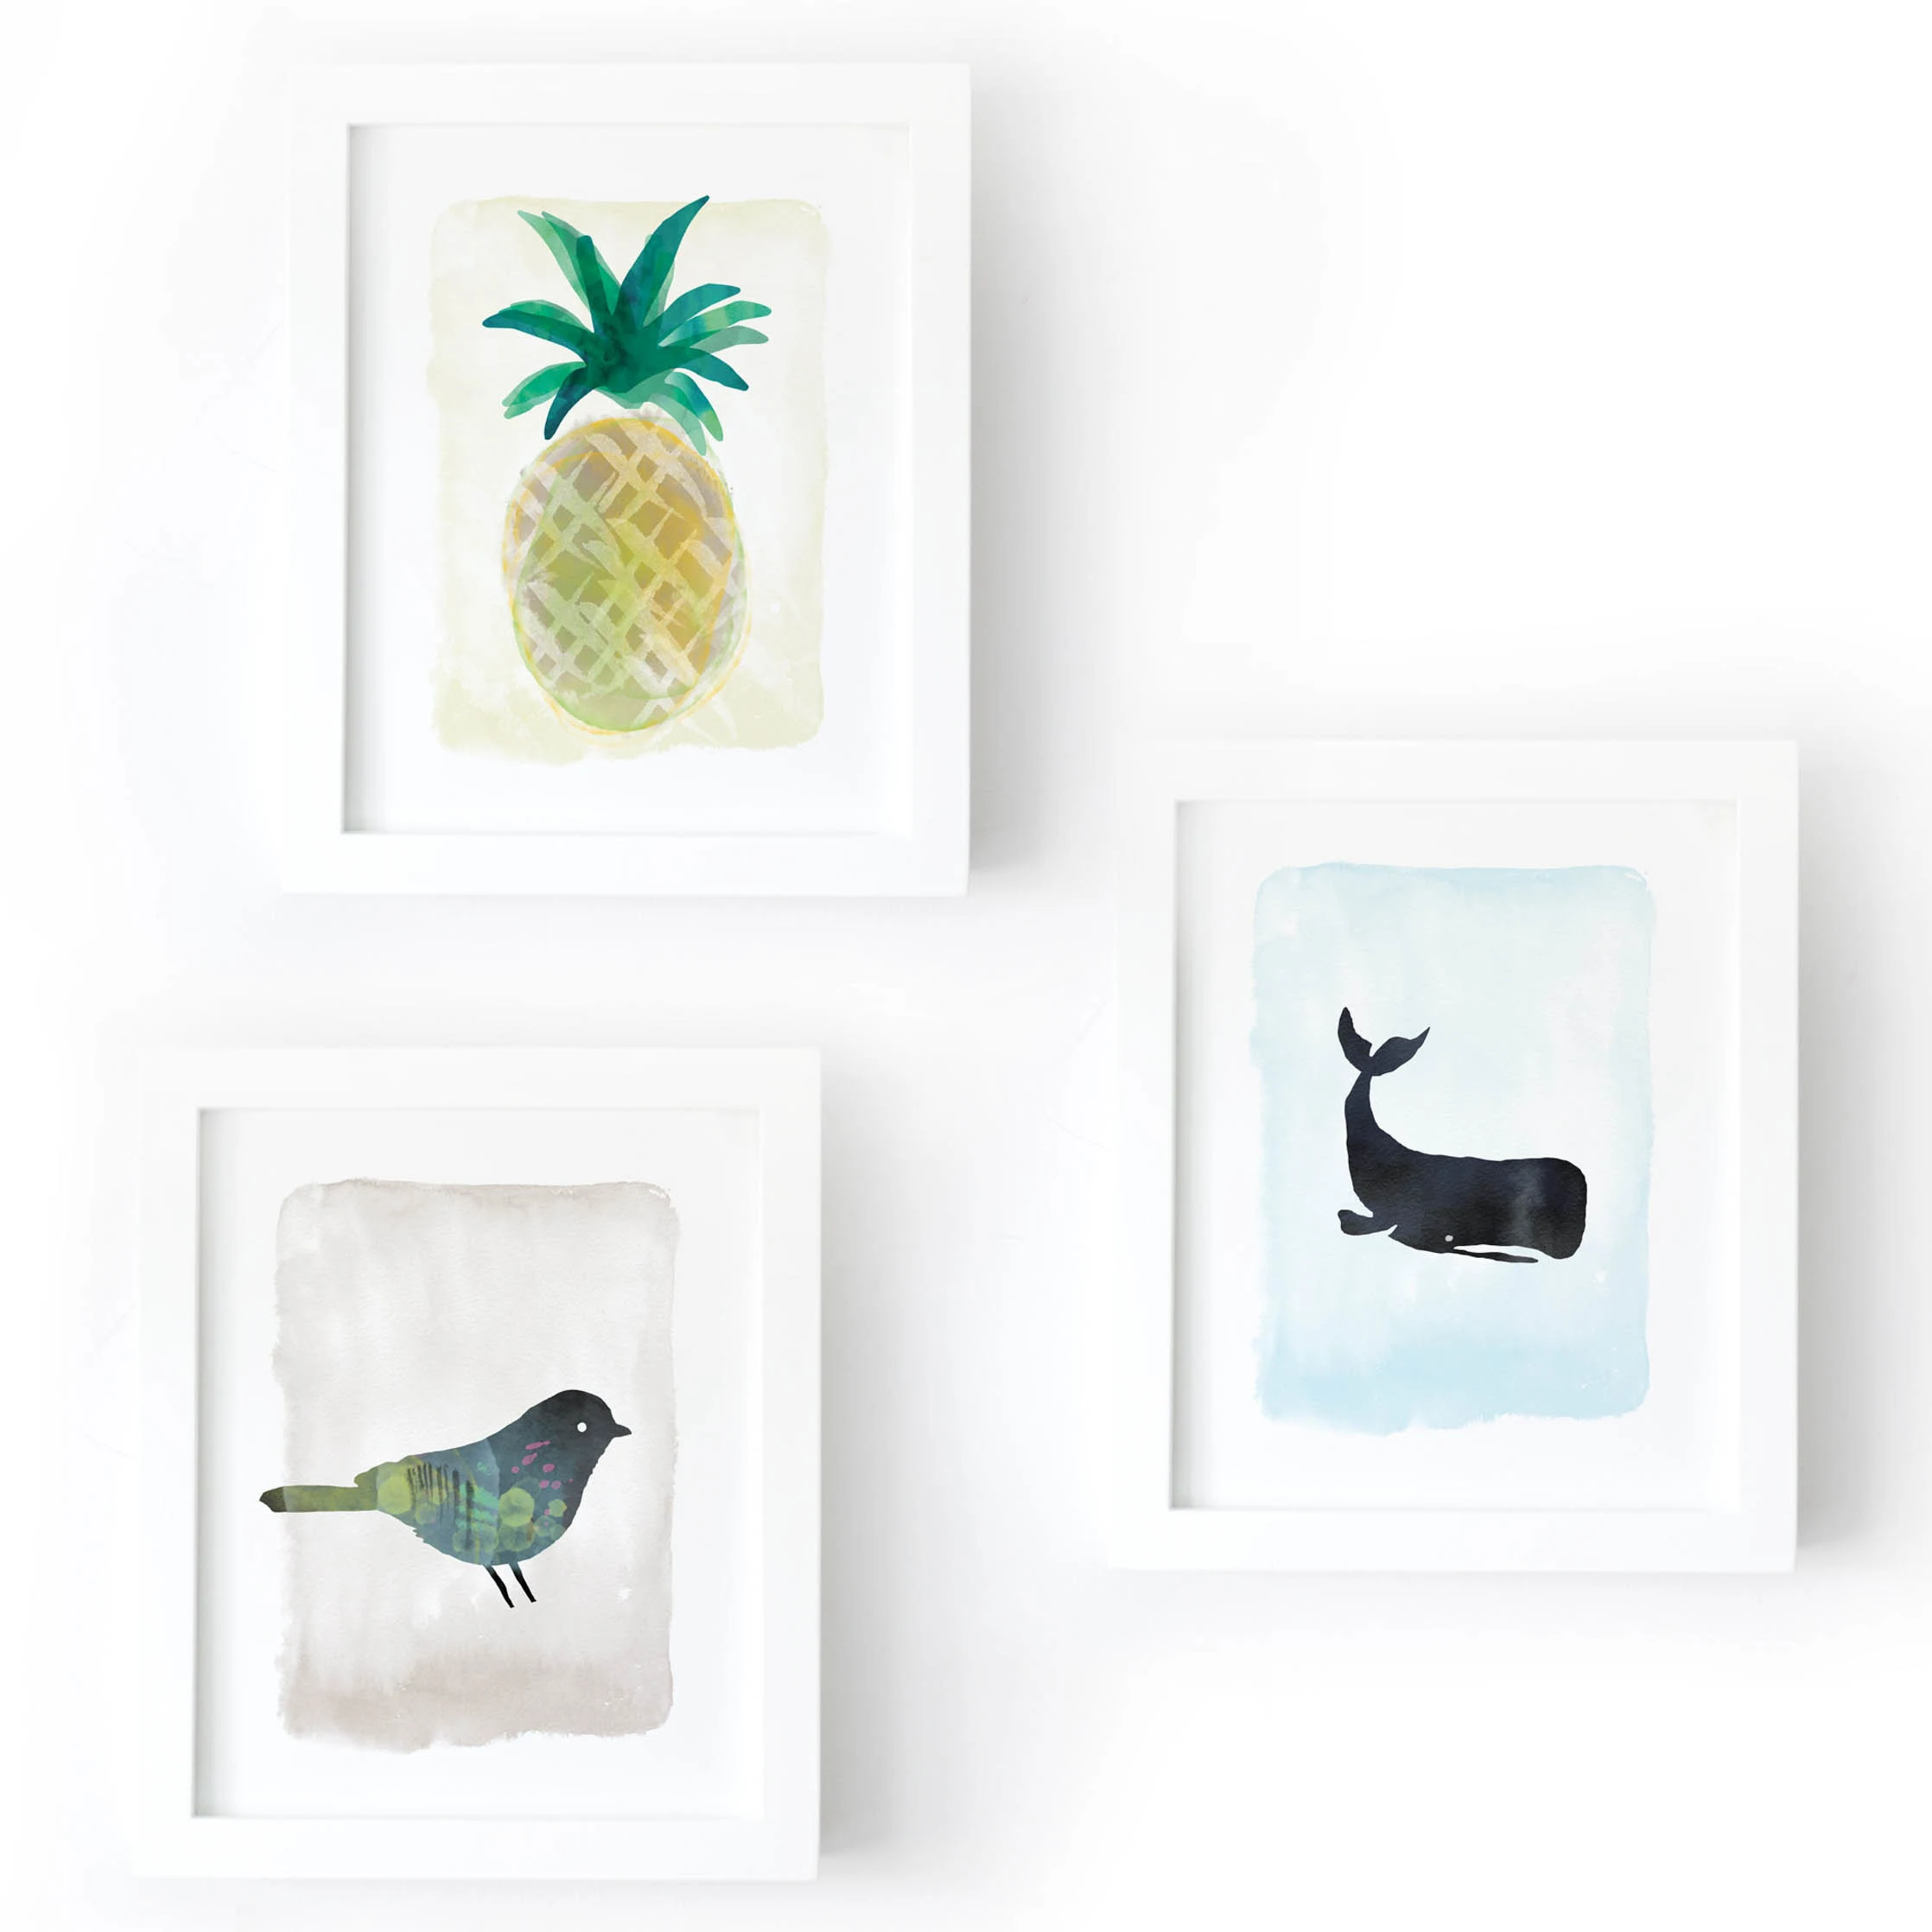 3 Free Printable Art Prints Just Right for Your Nursery Gallery Wall